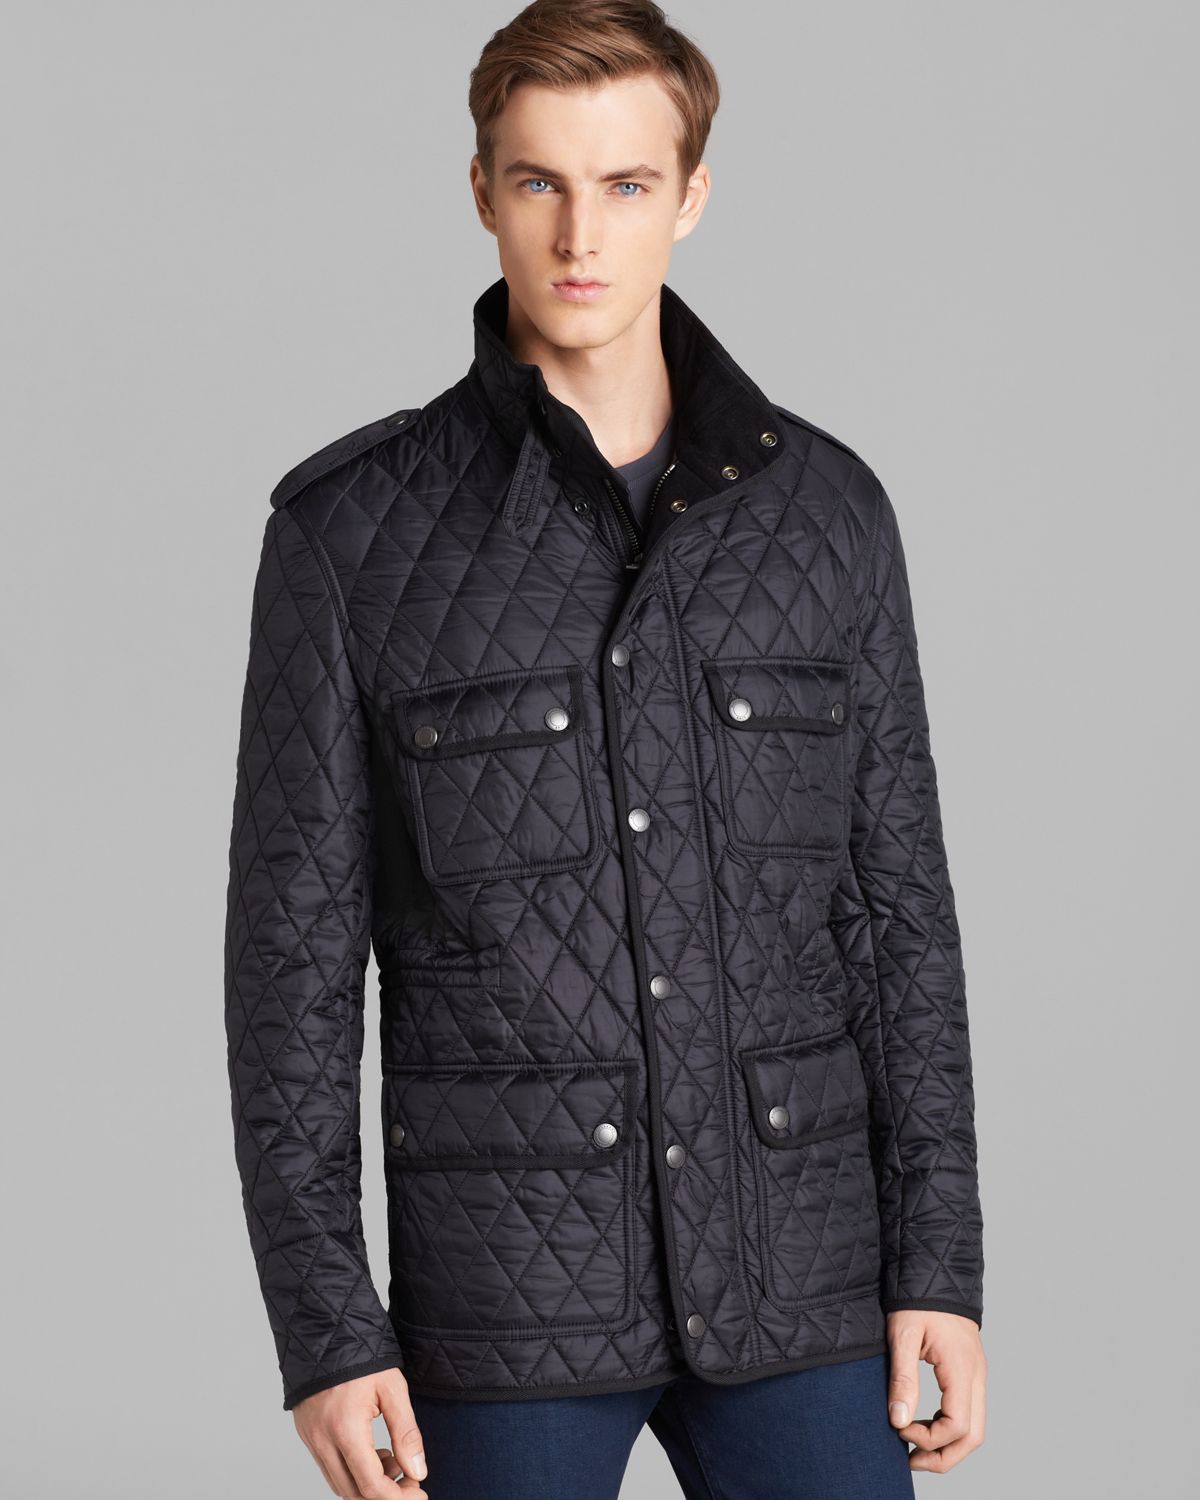 Burberry Brit Russel Diamond Quilted Jacket In Black For Men Lyst